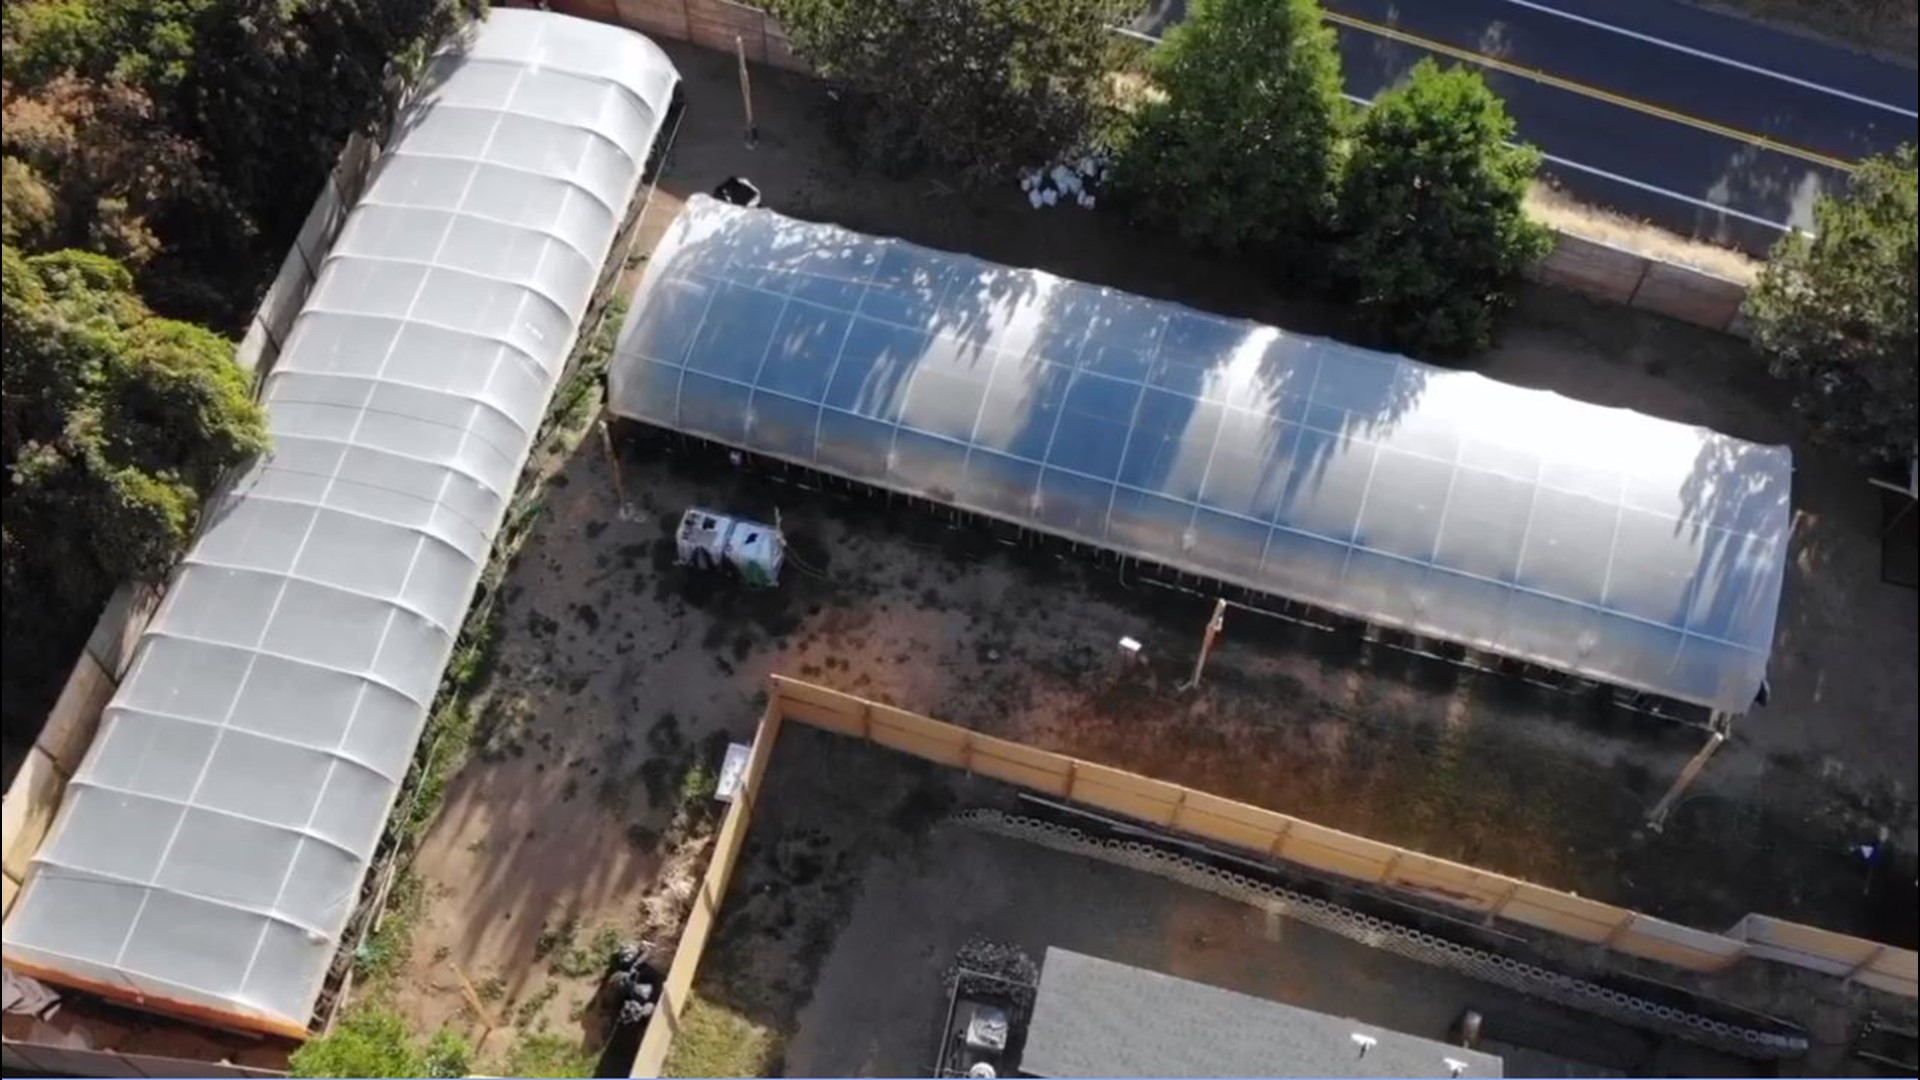 This type of illegal grow farm is similar to the one where El Dorado County Sheriff's Deputy Brian Ishmael was shot and killed while investigating calls of theft.